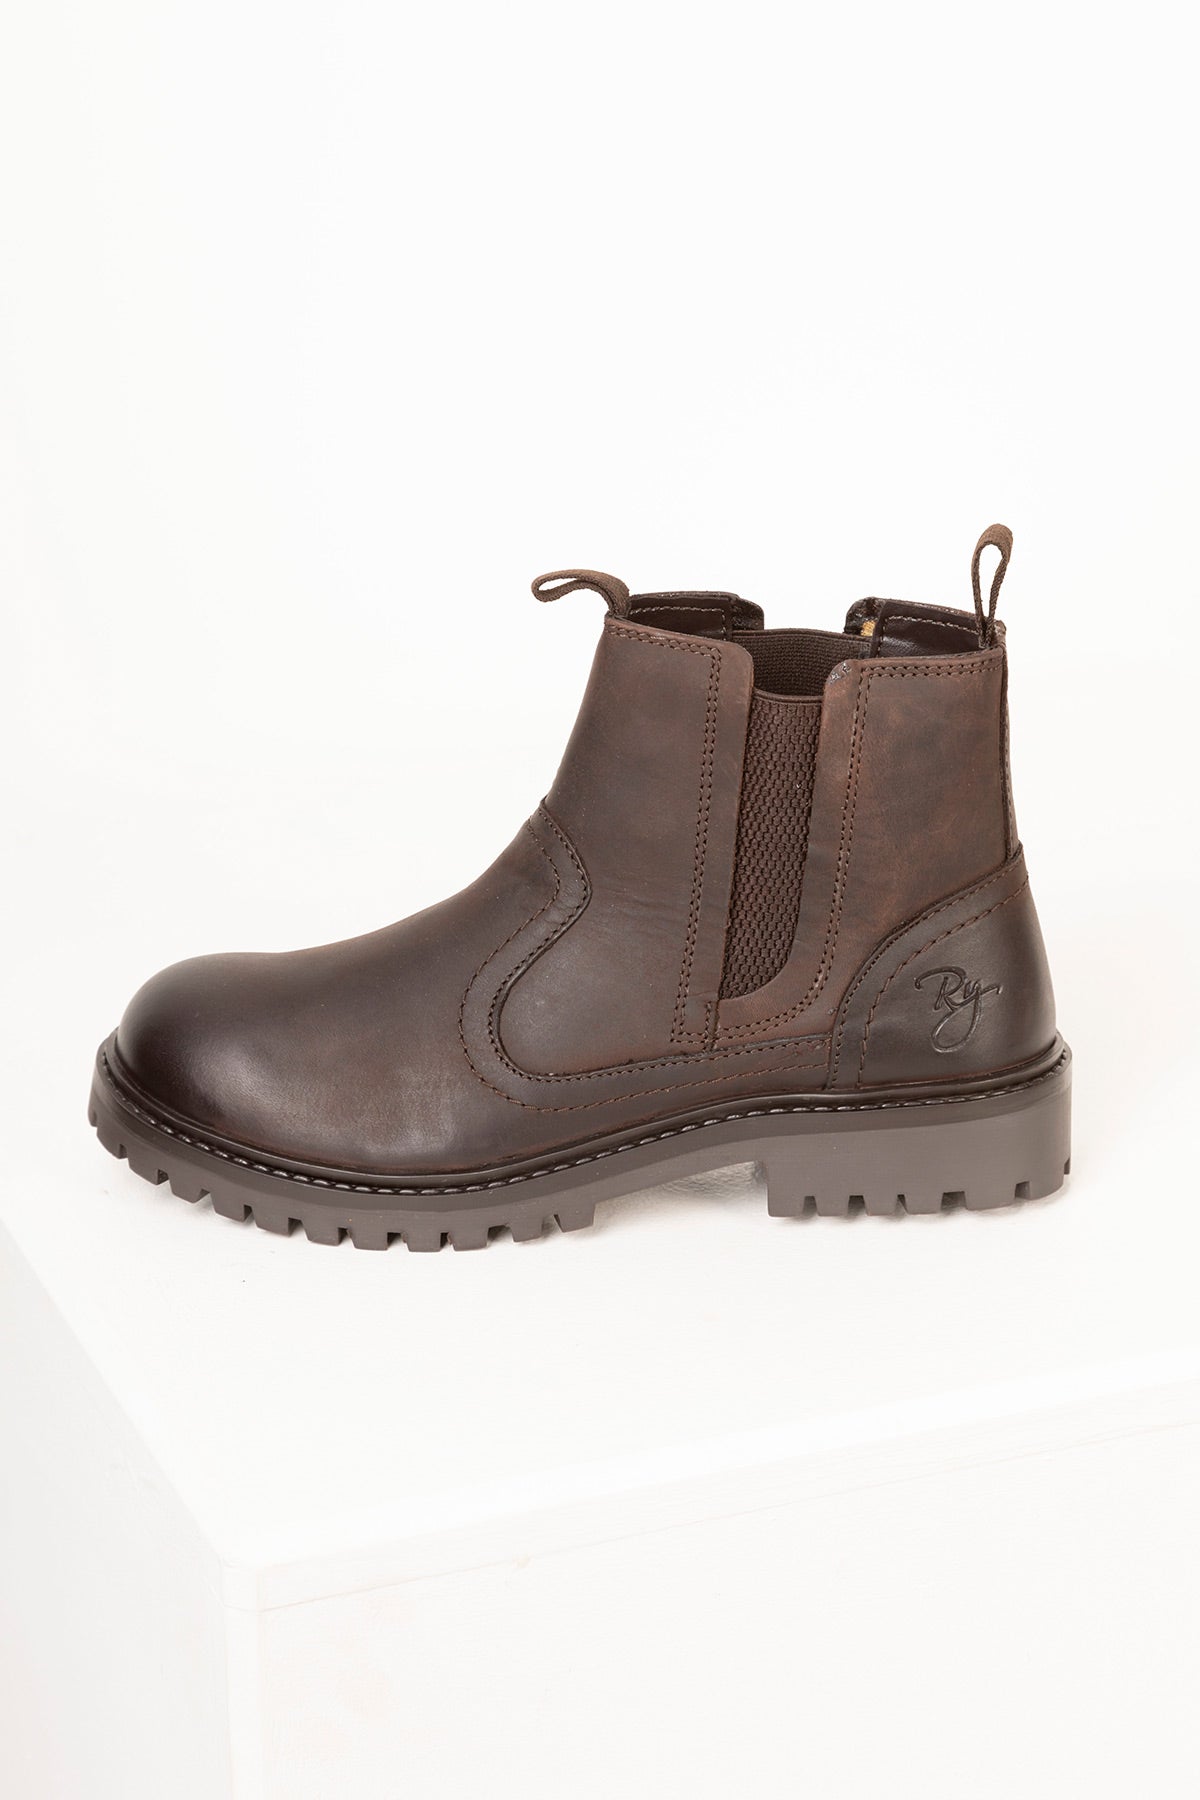 Ladies Leather Yard Boots UK | Leather Ankle Boots | Rydale